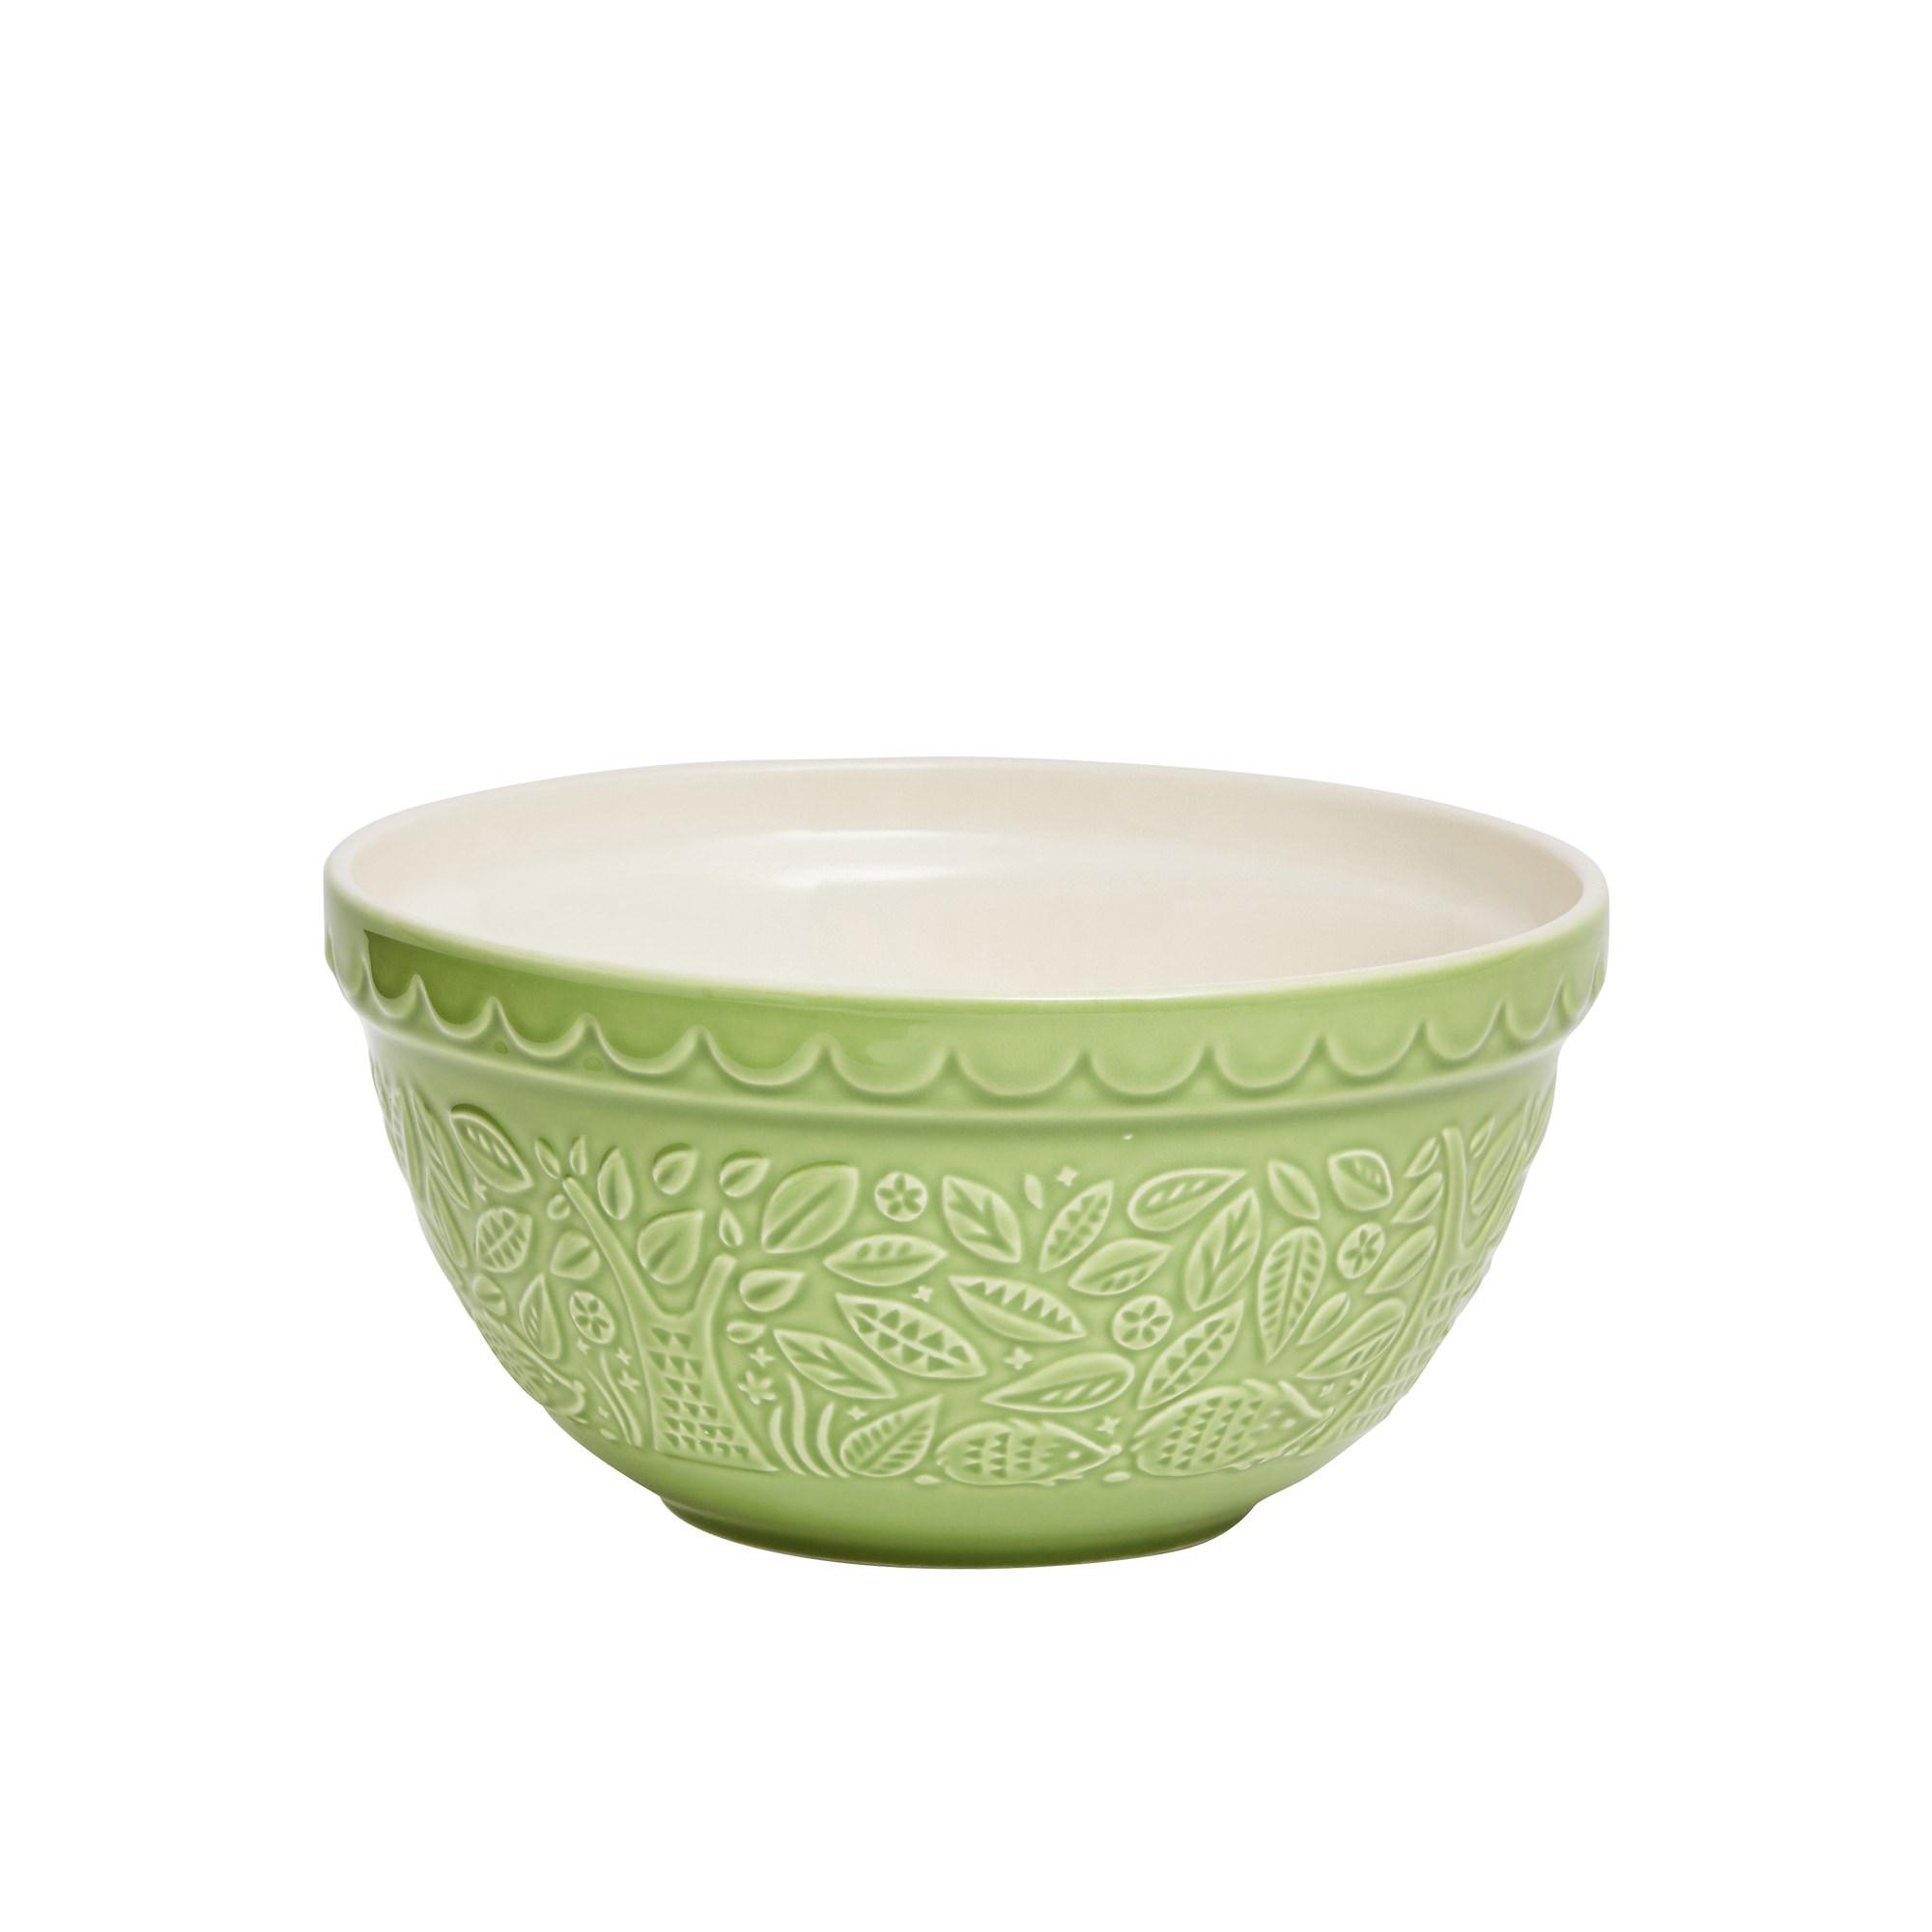 Mason Cash In The Forest Mixing Bowl 21cm - 1.1L Hedgehog Green Image 1